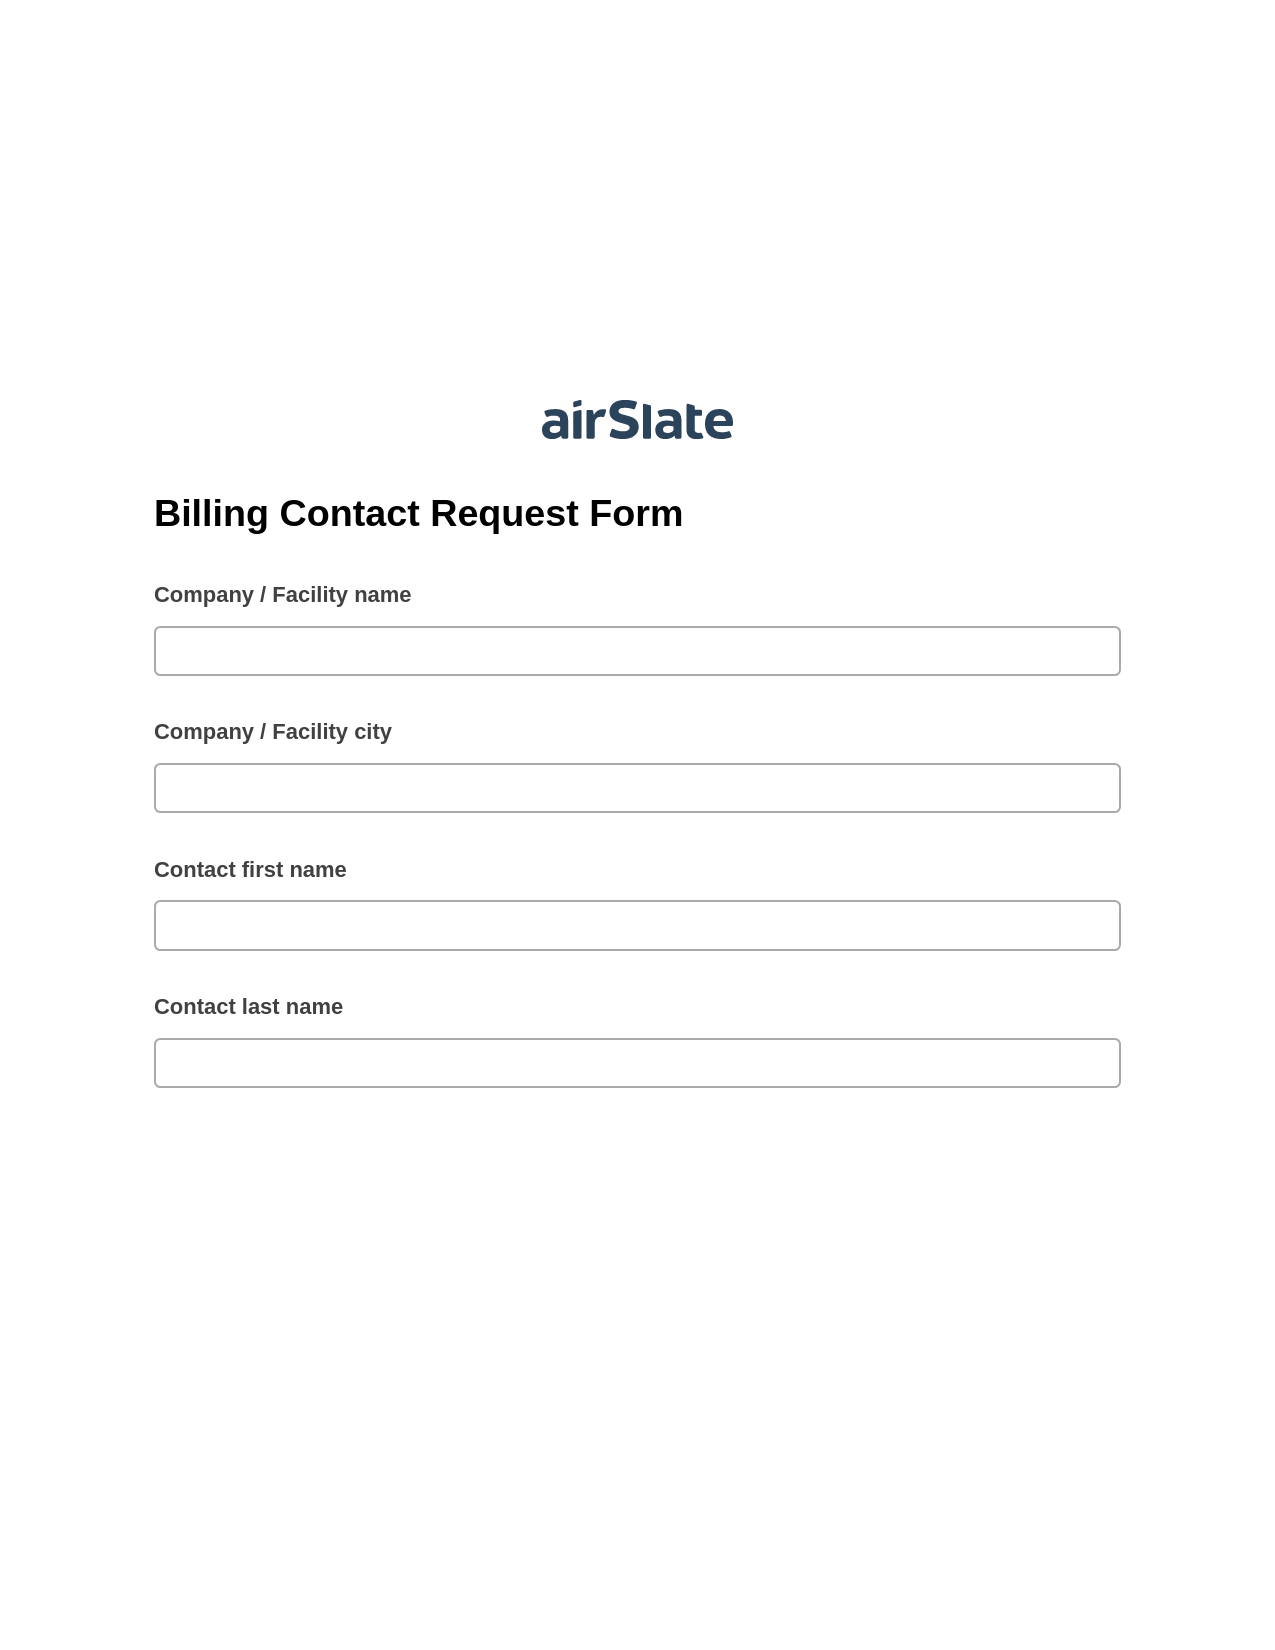 Multirole Billing Contact Request Form Pre-fill Slate from MS Dynamics 365 Records Bot, SendGrid send Campaign bot, Email Notification Postfinish Bot